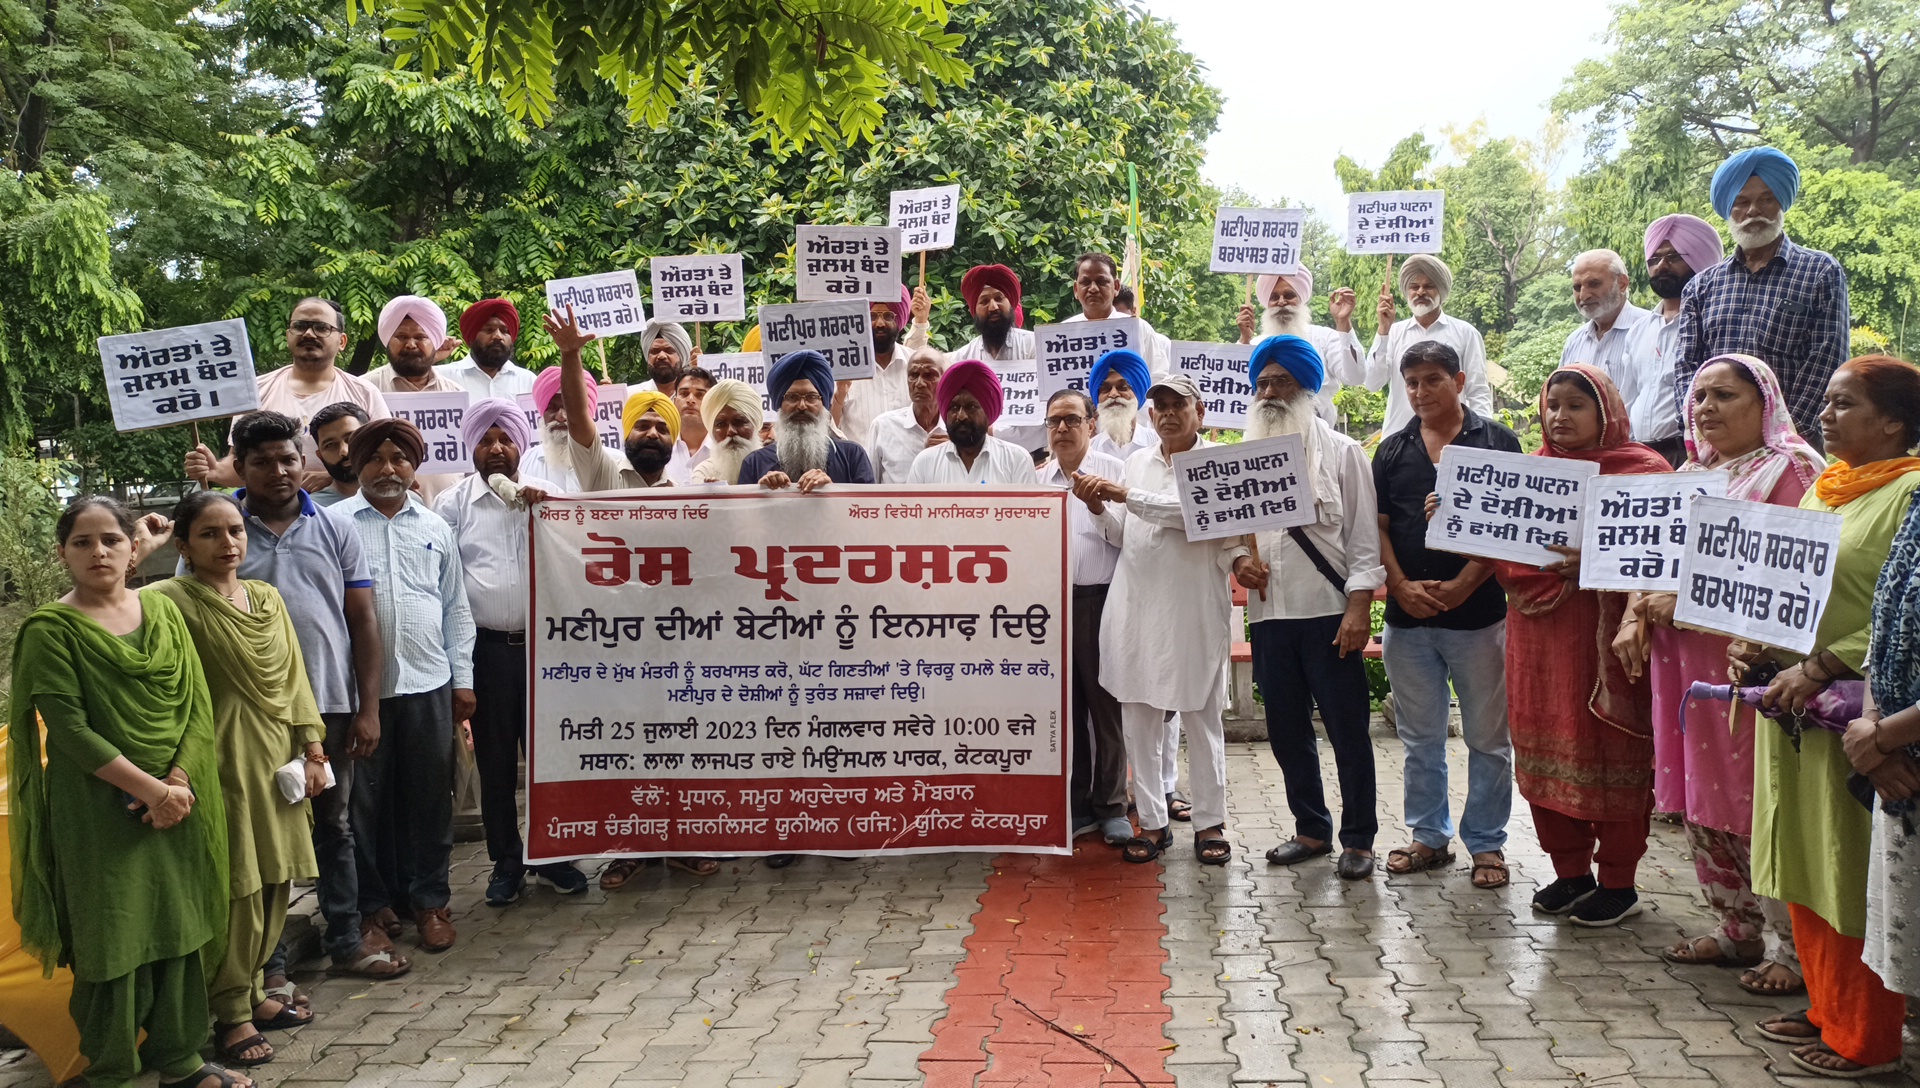 Kuki Women allegedly paraded naked,gang raped: Punjab Chandigarh union of journalists Kotkapura holds protest march against Manipur incidents